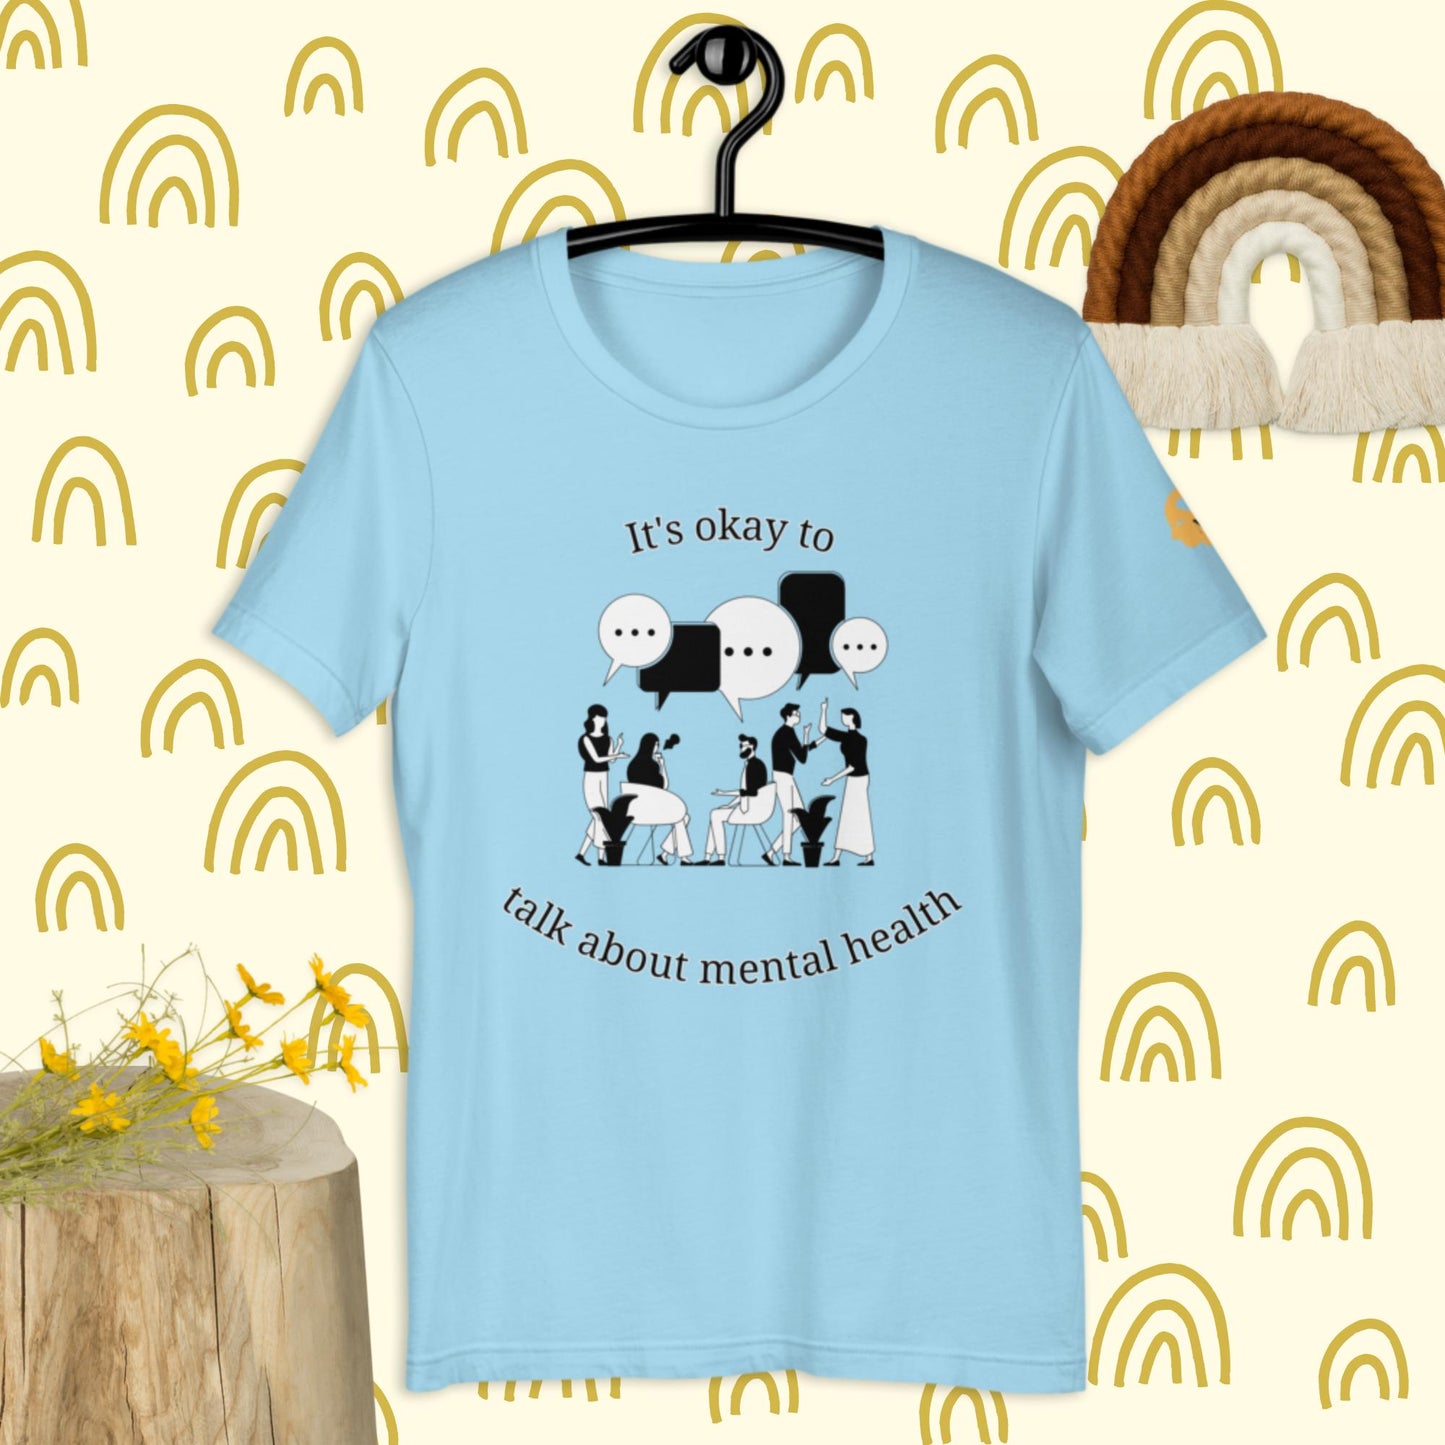 It's okay to talk about mental health t-shirt